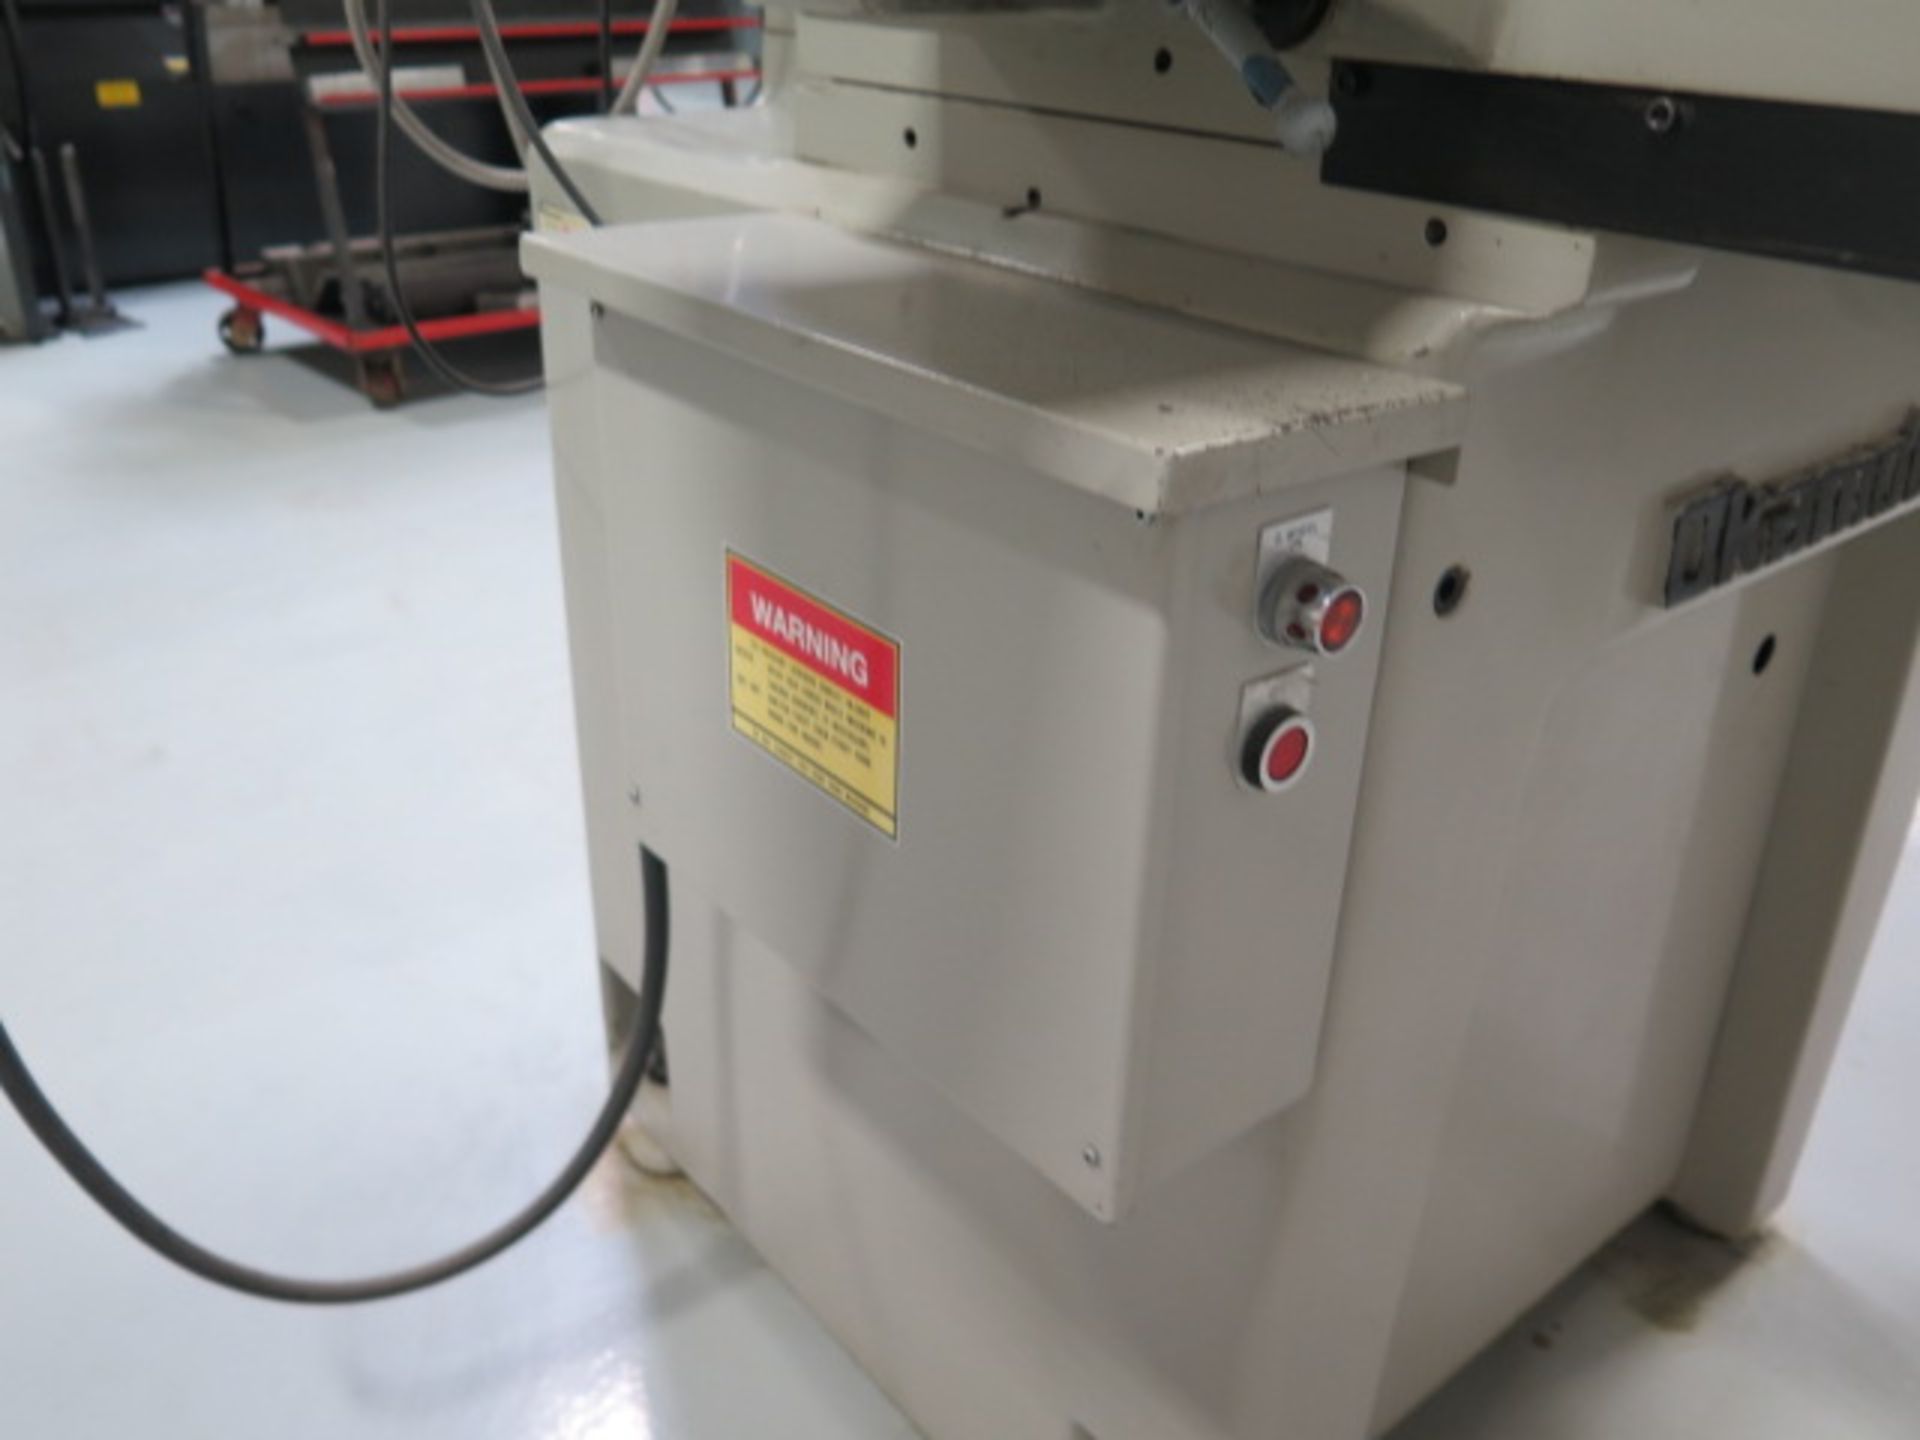 Okamoto “6-18 LINEAR” 6” x 18” Surface Grinder s/n 4469 w/ Mitutoyo UDR-220 Program DRO, SOLD AS IS - Image 12 of 15